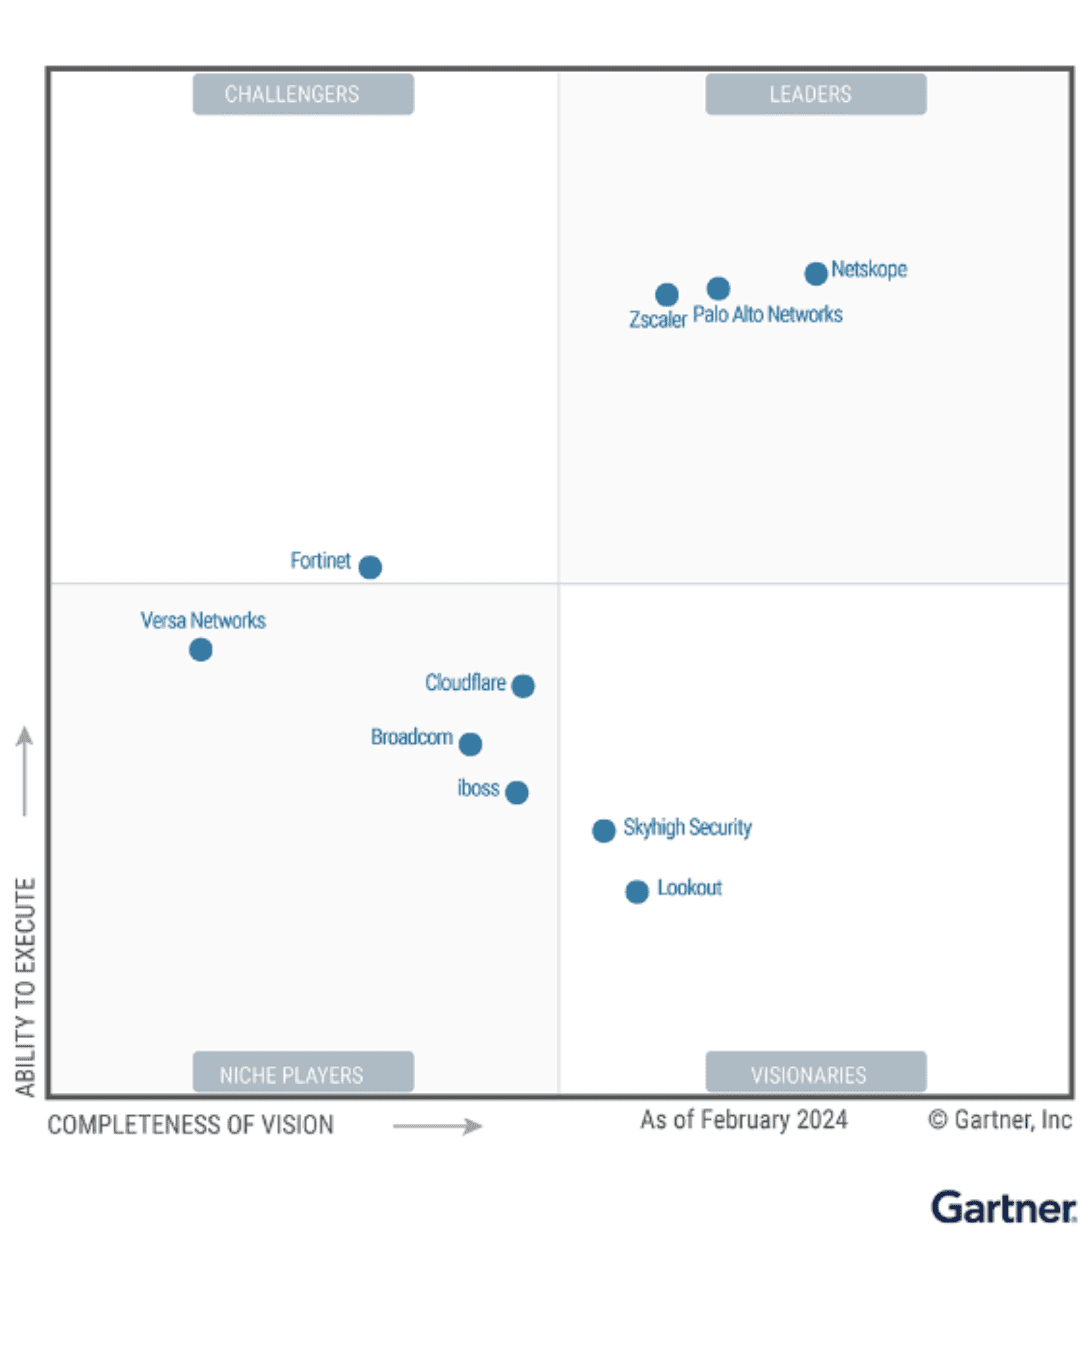 Trustack MSP Cyber Security, IT Services, IT Support. A Gartner Magic Quadrant graph dated February 2024 evaluates companies based on their completeness of vision and ability to execute. Categories include Leaders, Challengers, Visionaries, and Niche Players. Notable listings feature Netskope, Zscaler, and Palo Alto Networks.